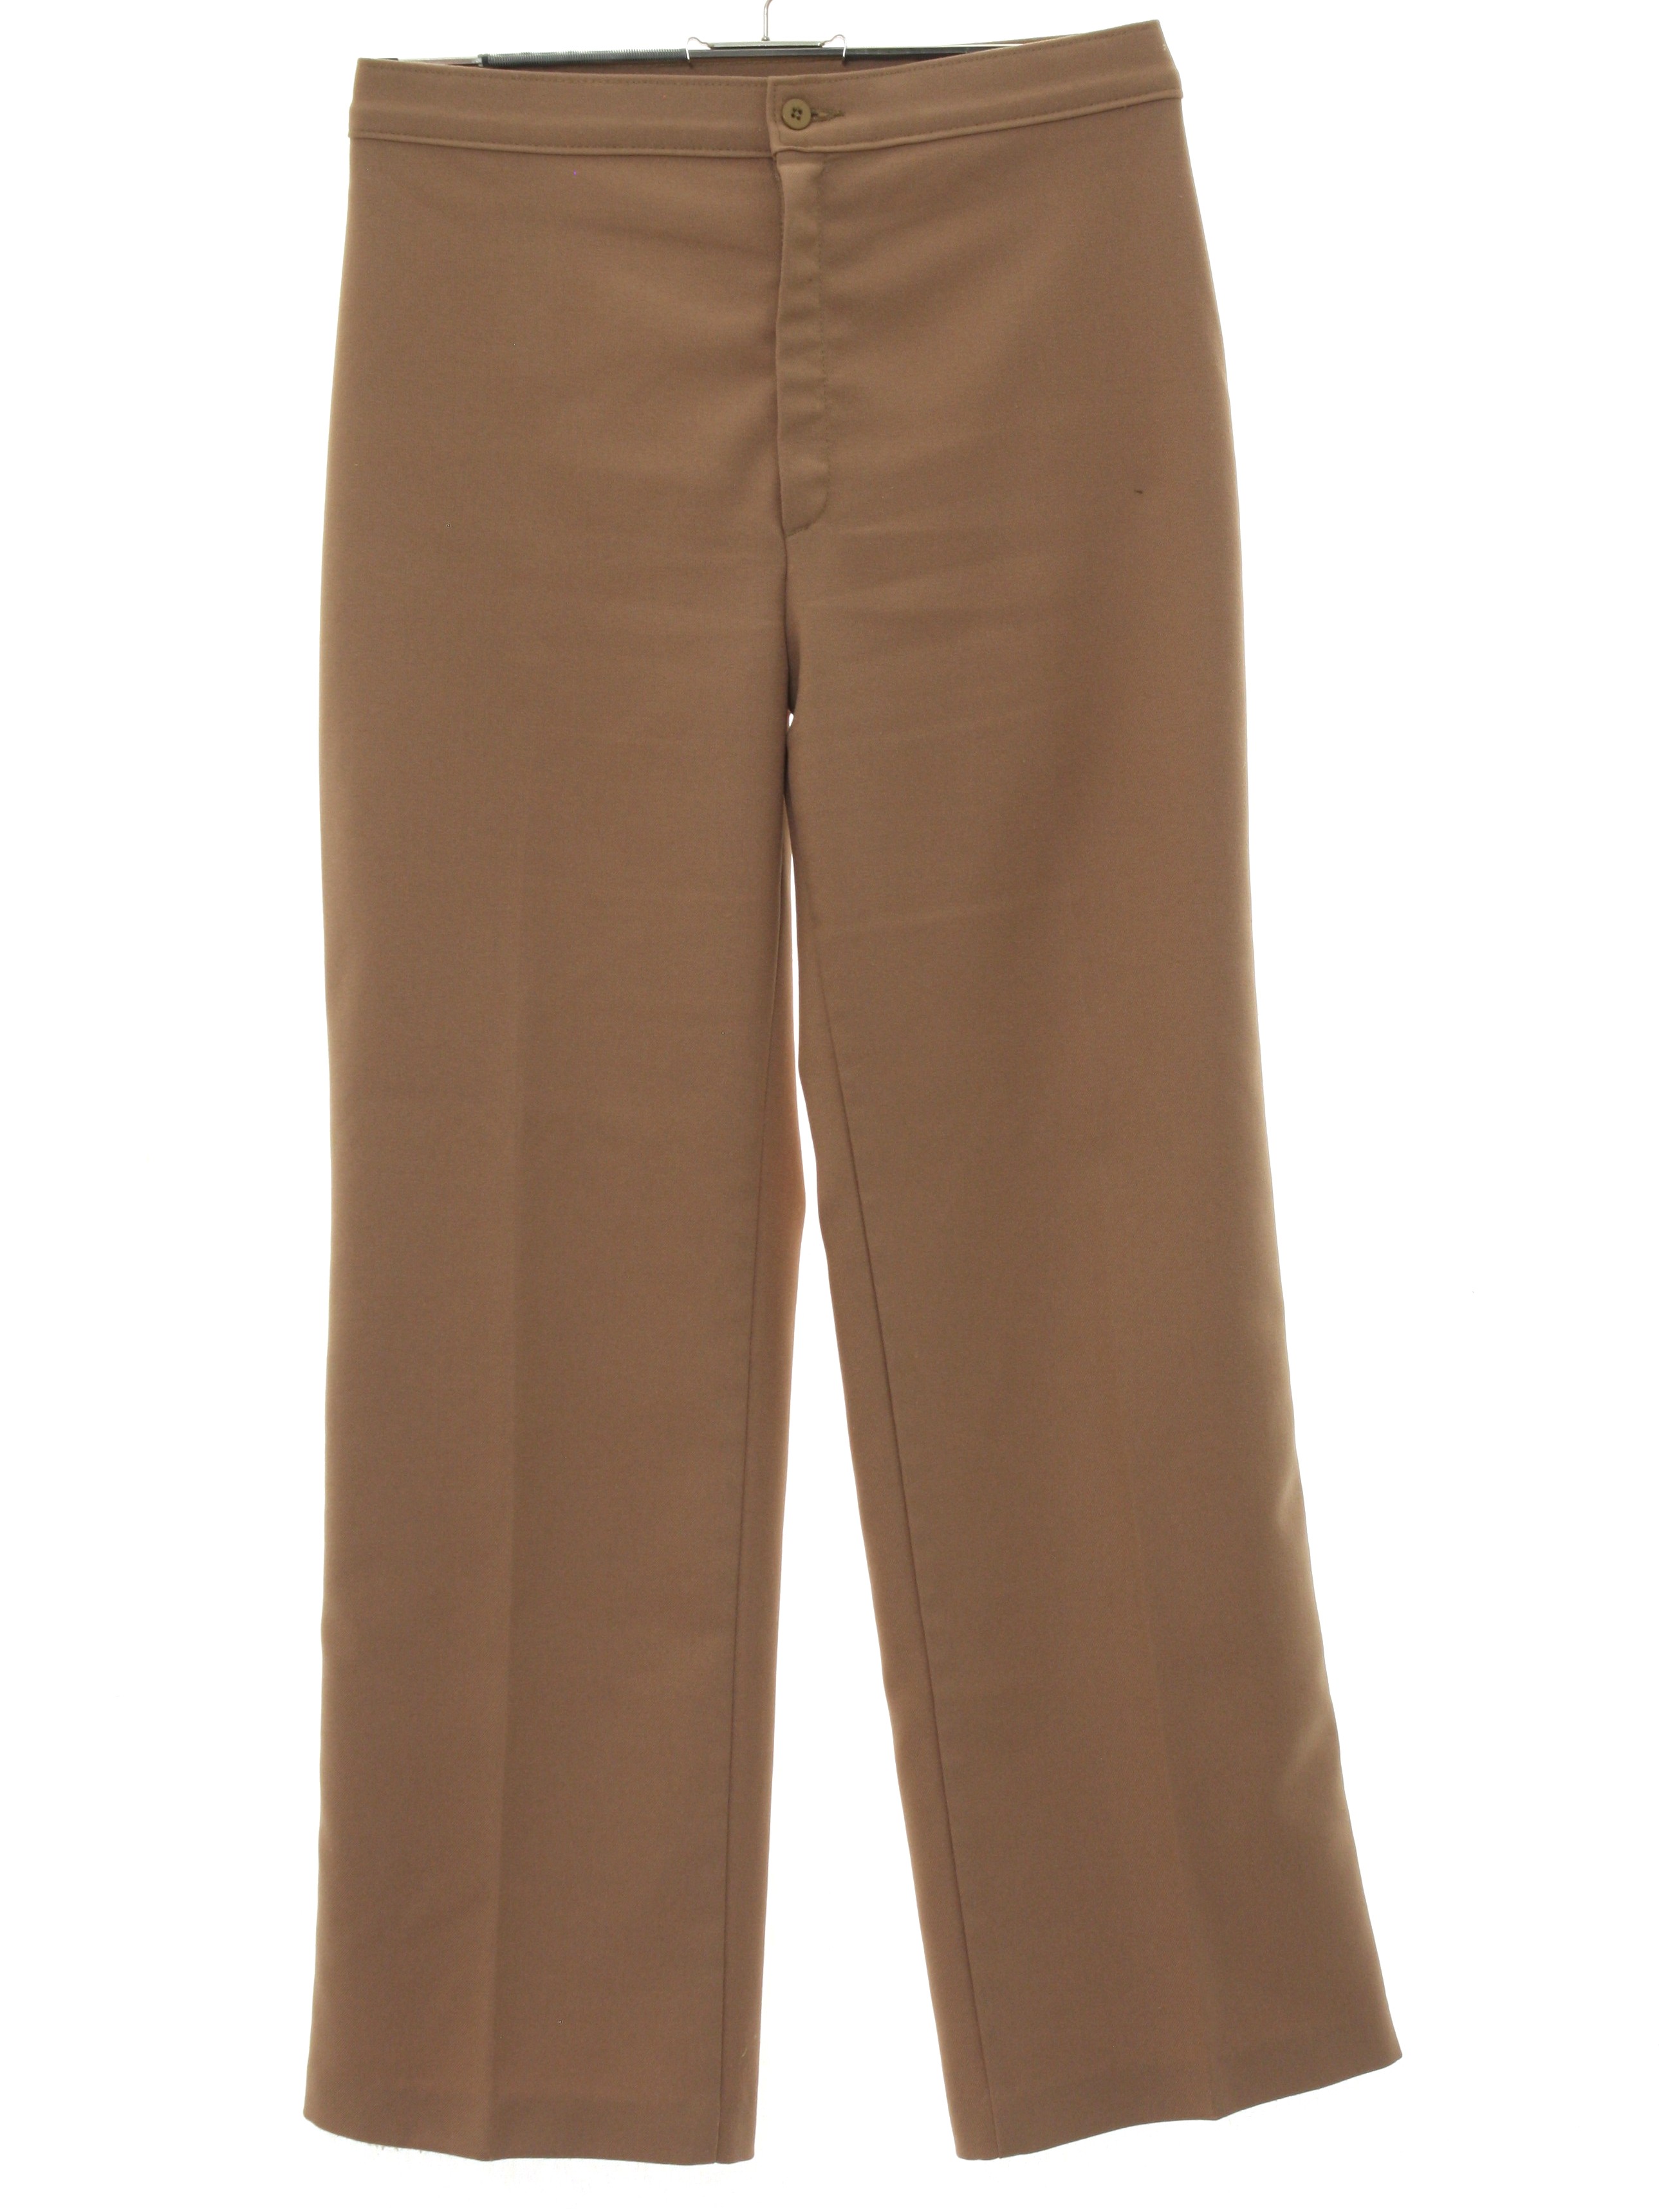 1980's Pants (JCPenney): 80s -JCPenney- Womens tan polyester pants ...